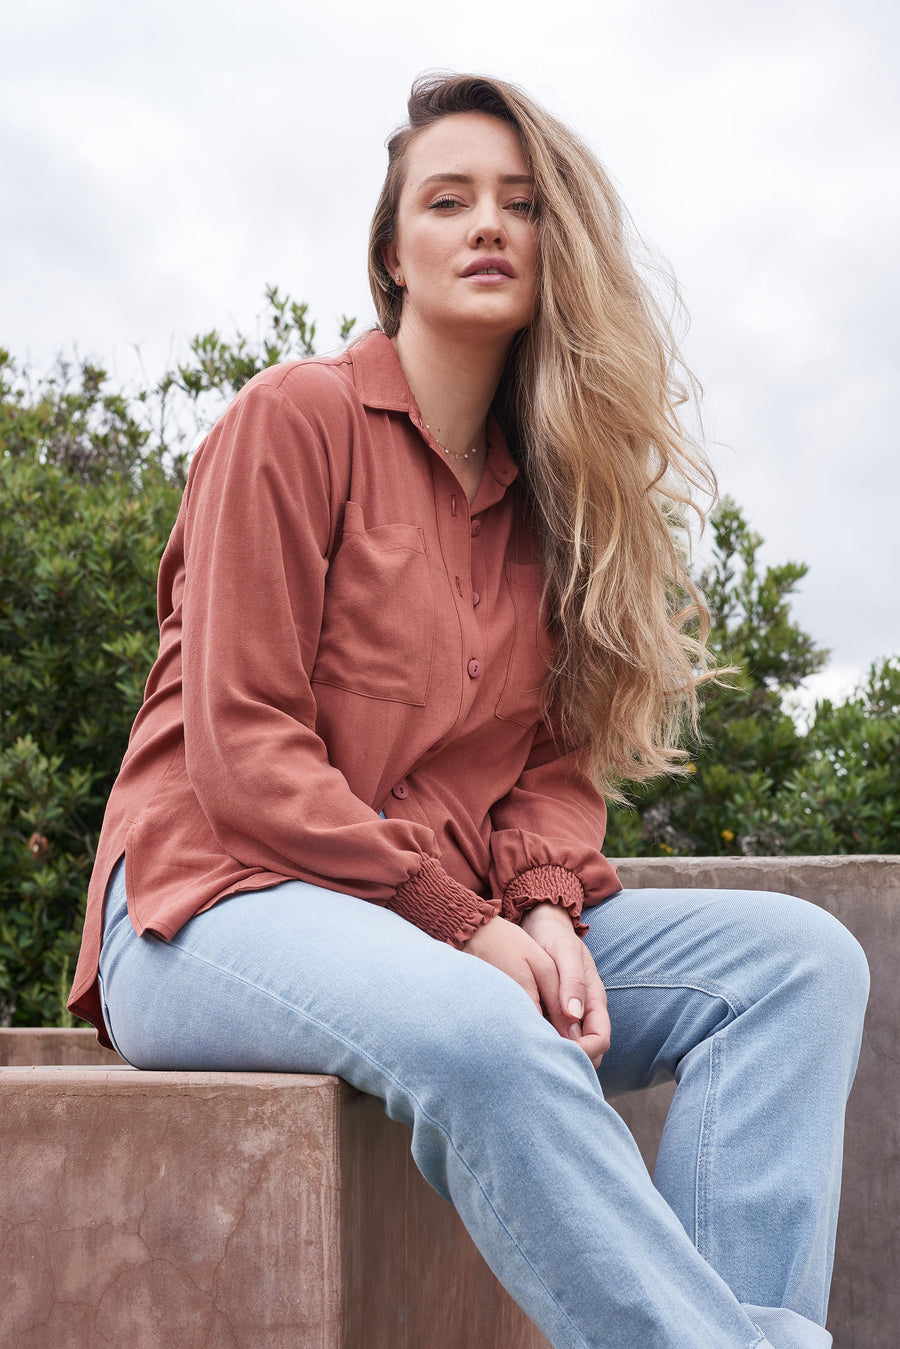 Nursing fashion meets style with the convenient ARIA button-up top for new moms.